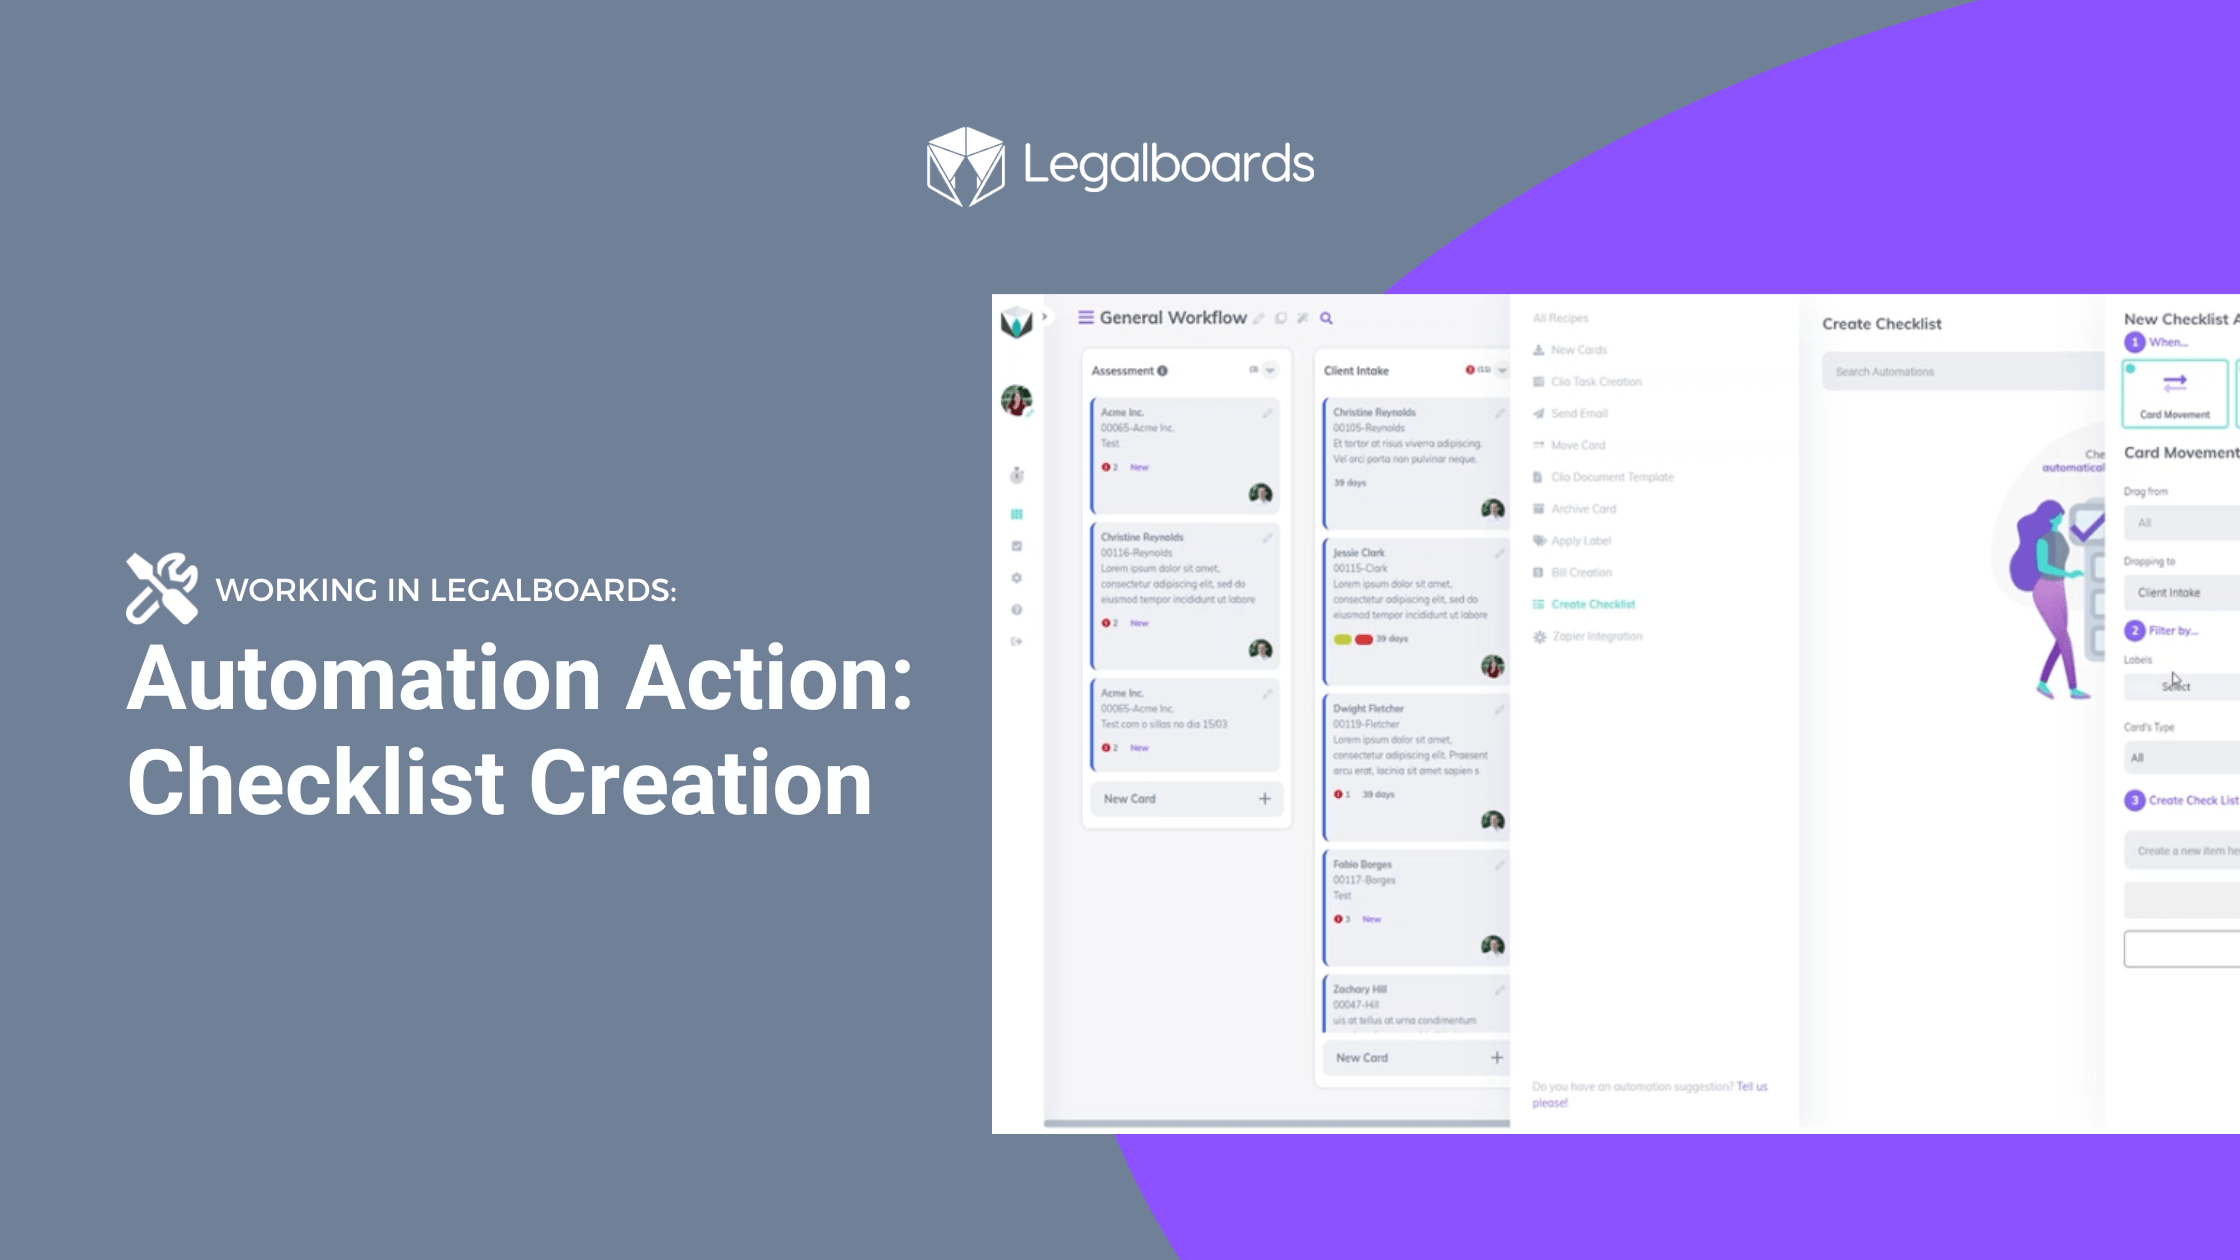 Working in Legalboards- Automation Action: Checklist Creation